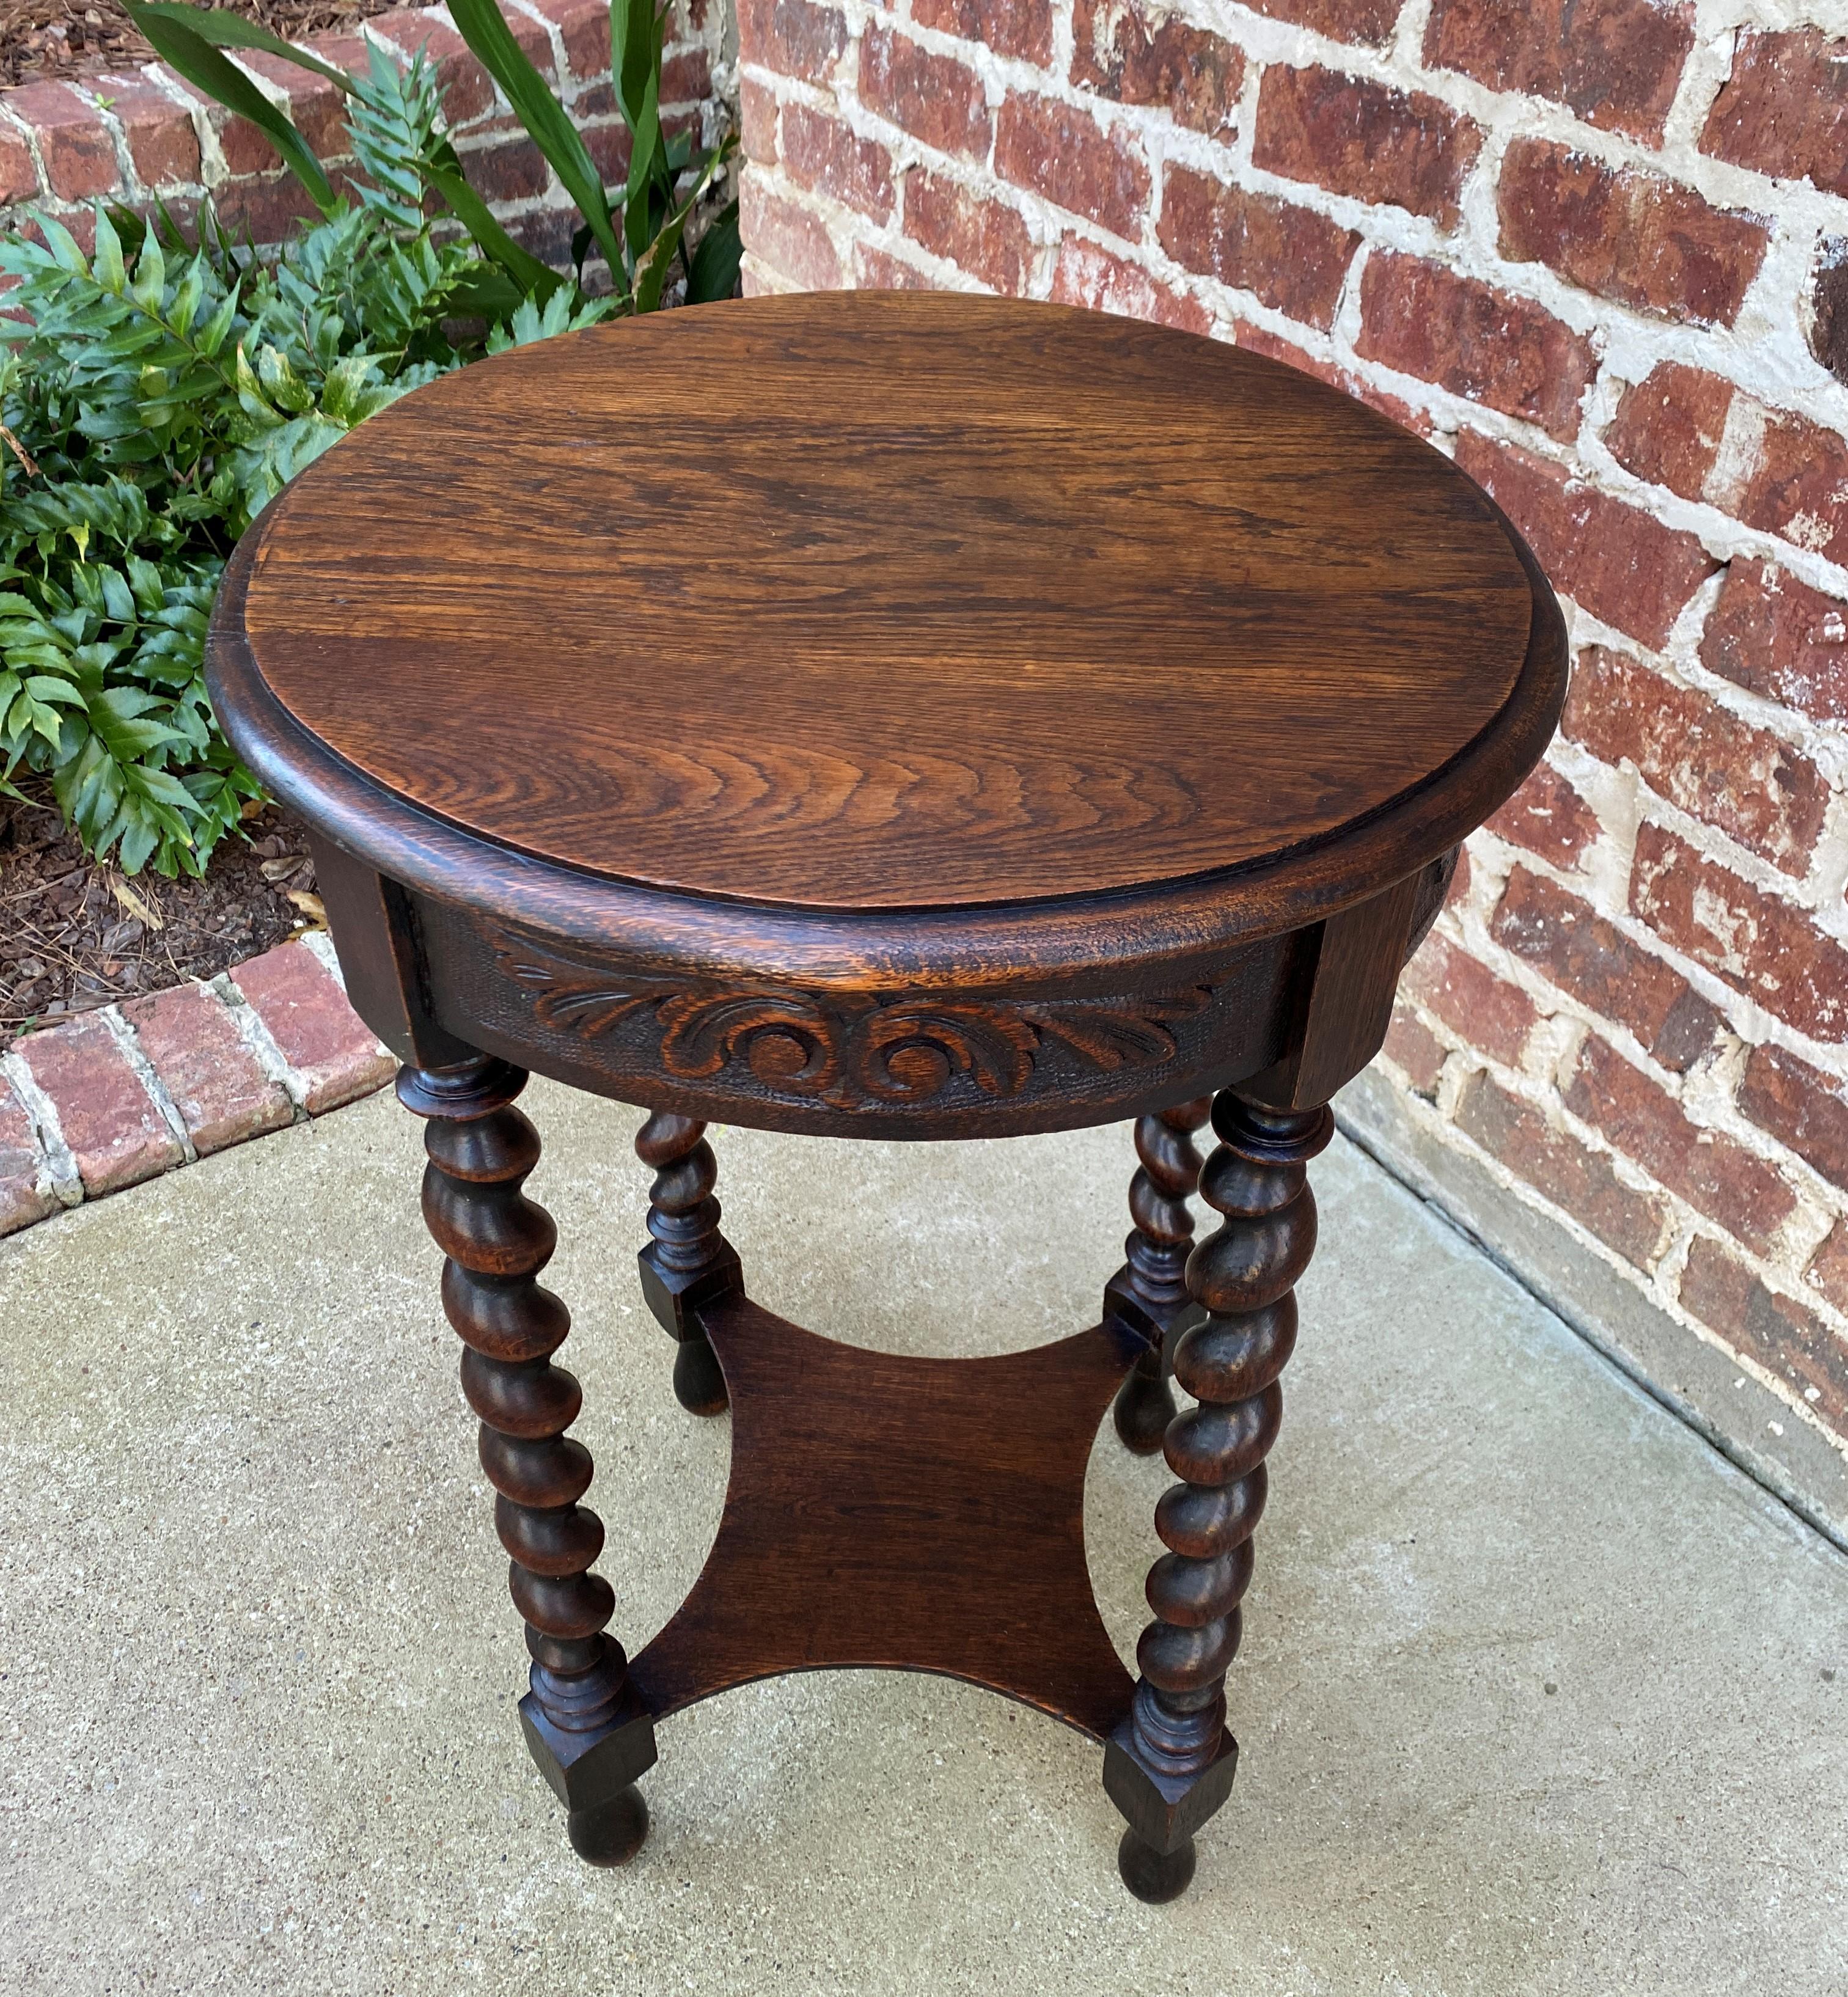 Antique English Round Table End Table Occasional Table Barley Twist Oak 2-Tier 11